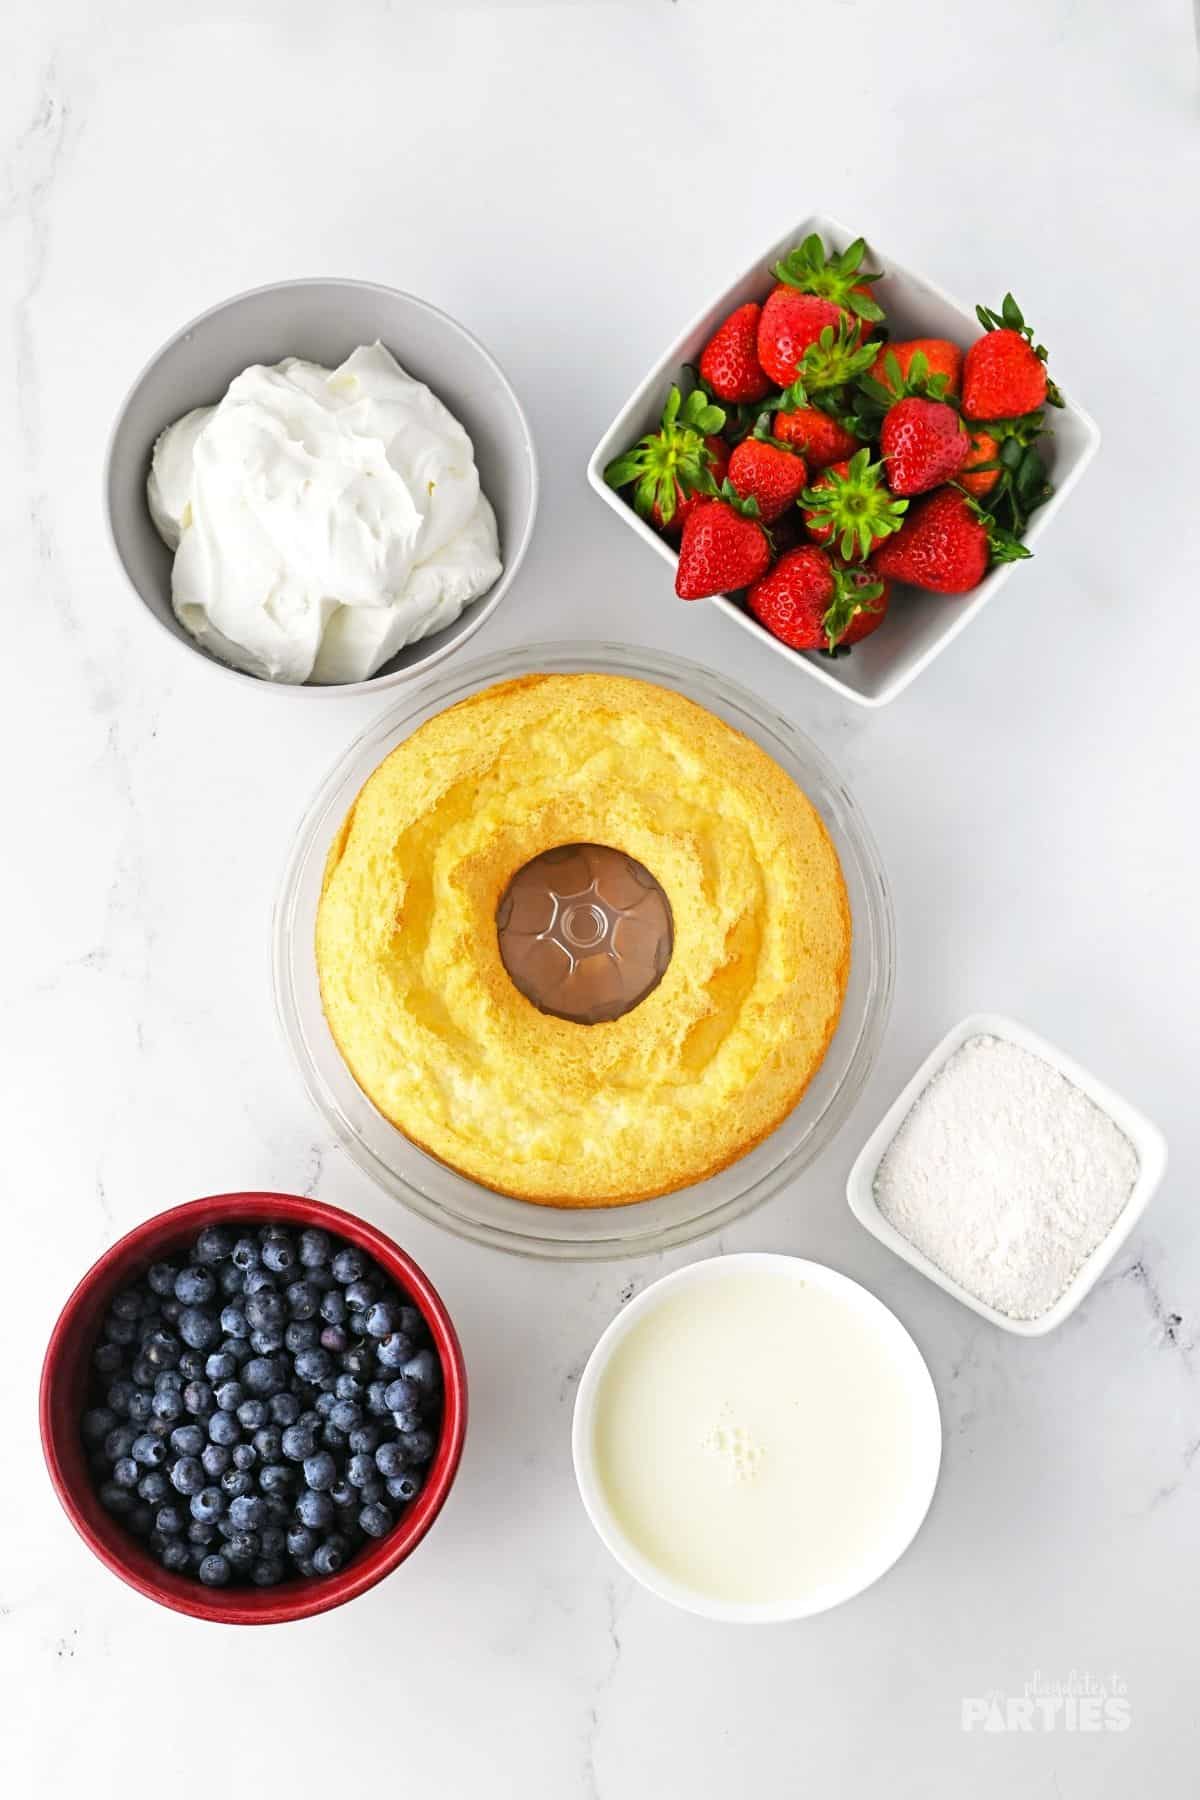 Ingredients for a July 4th patriotic berry trifle.